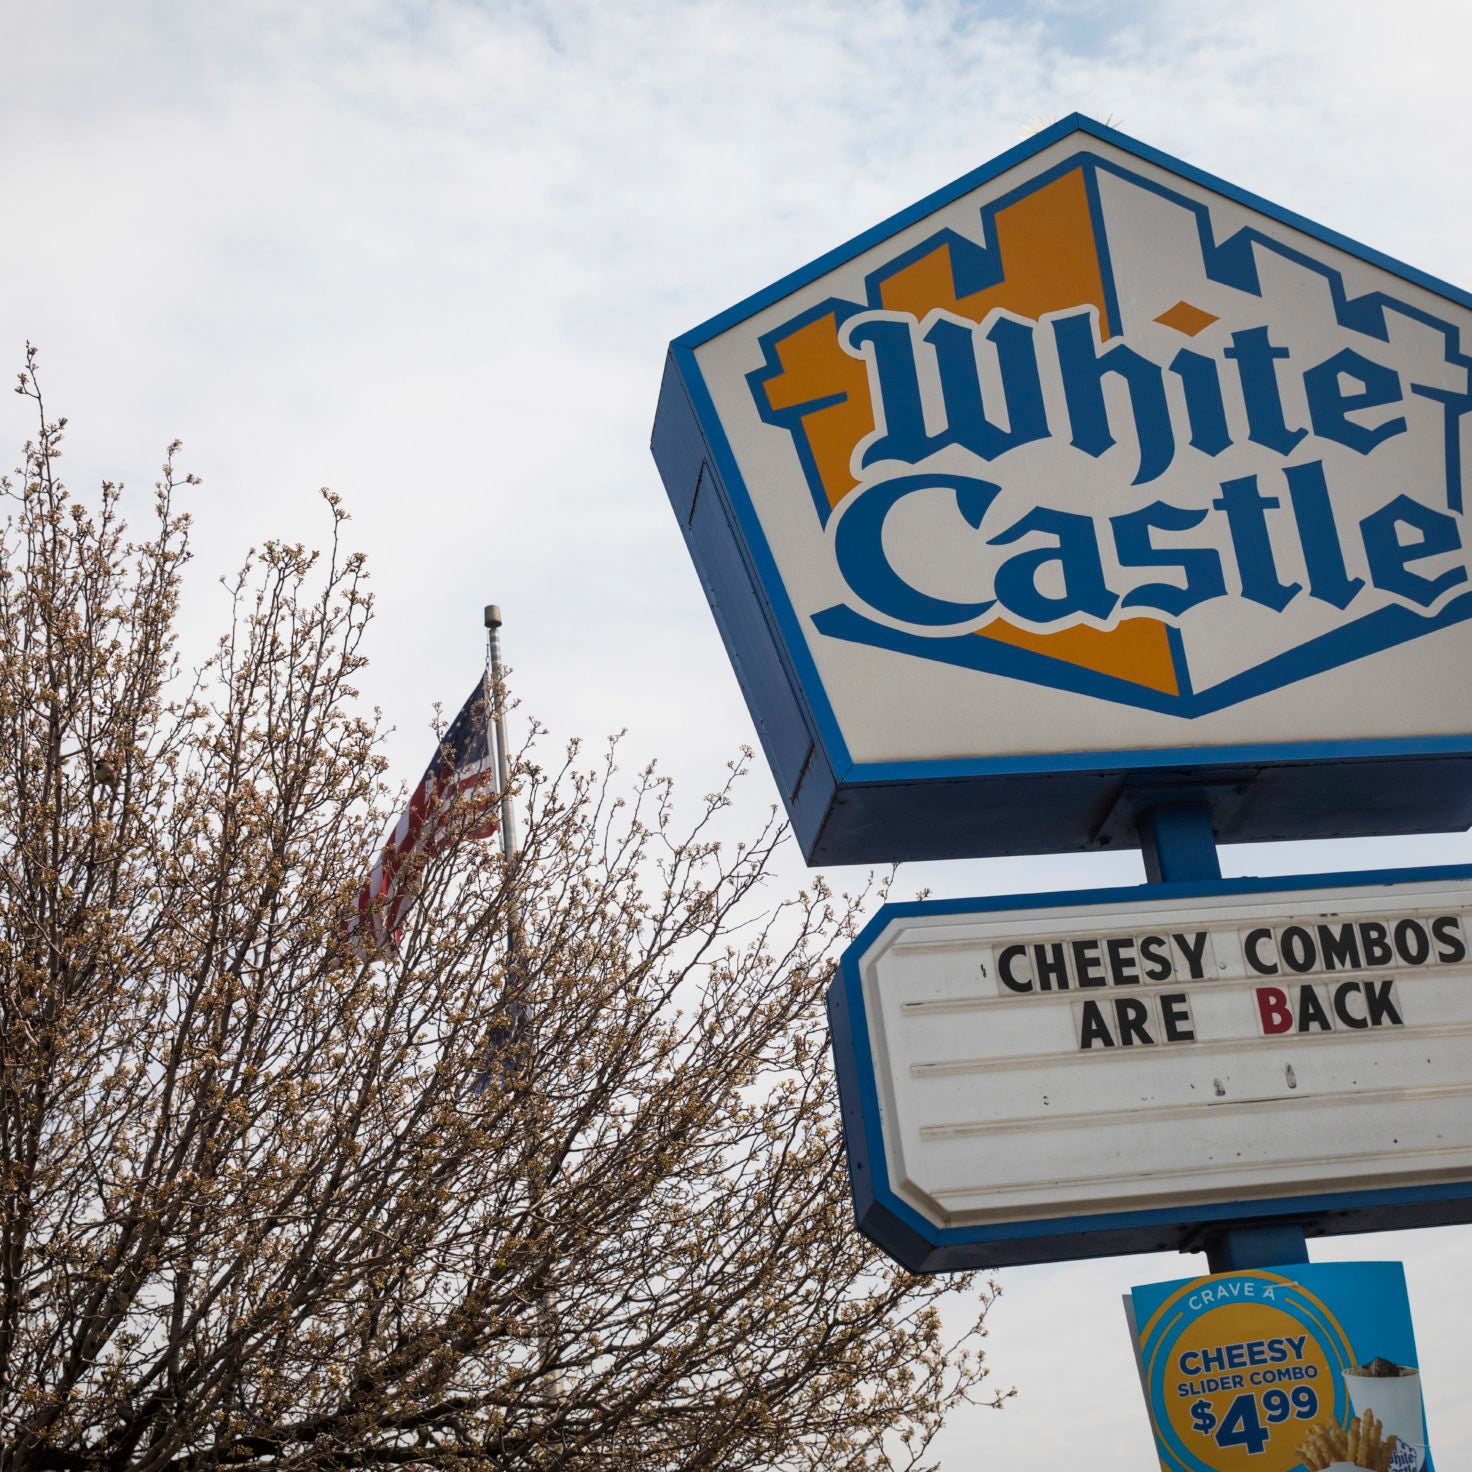 3 Indiana Judges Suspended Without Pay After Fight At White Castle